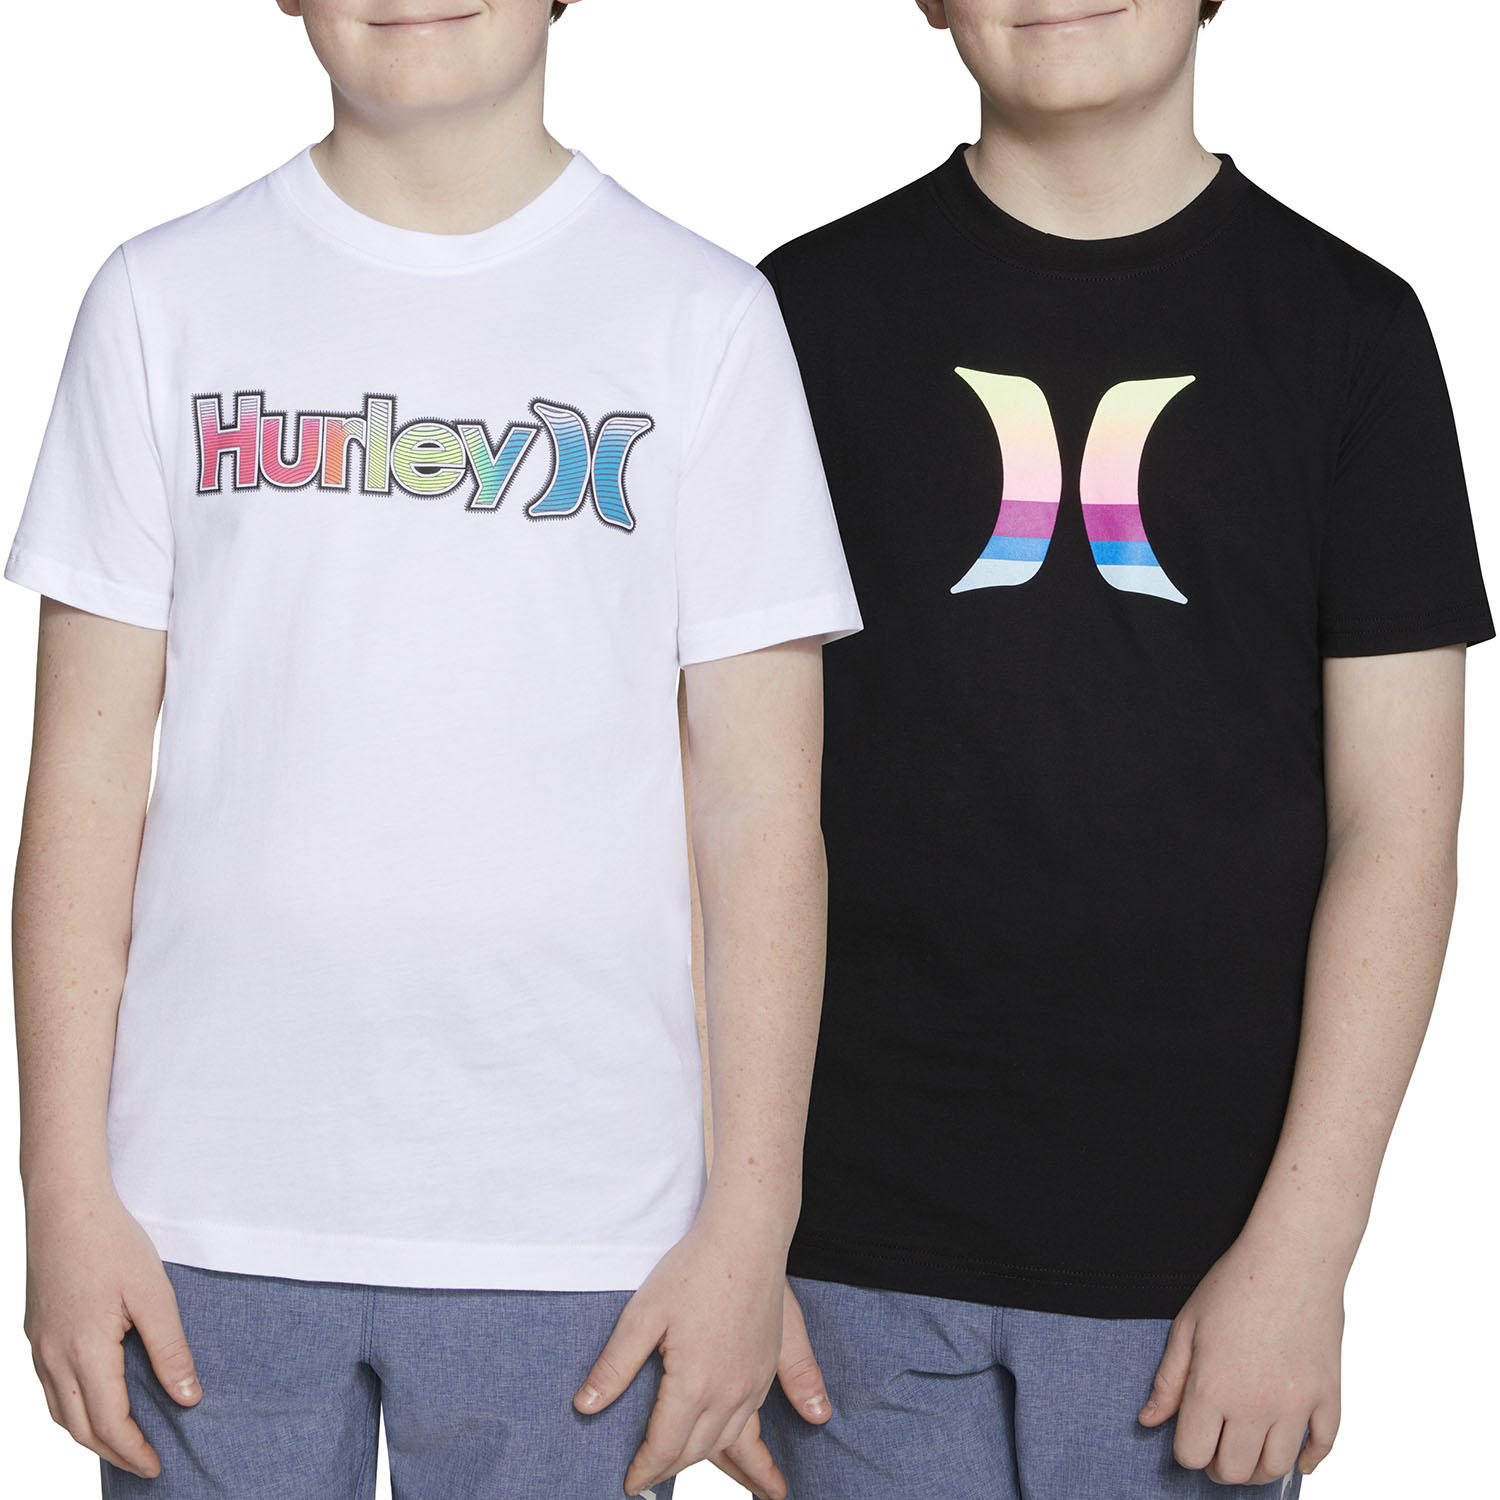 Sam's Club Members: 2-Pack Hurley Boys' Short Sleeve Graphic T-Shirts $7.80 ($3.90 each) & More + Free Shipping for Plus Members